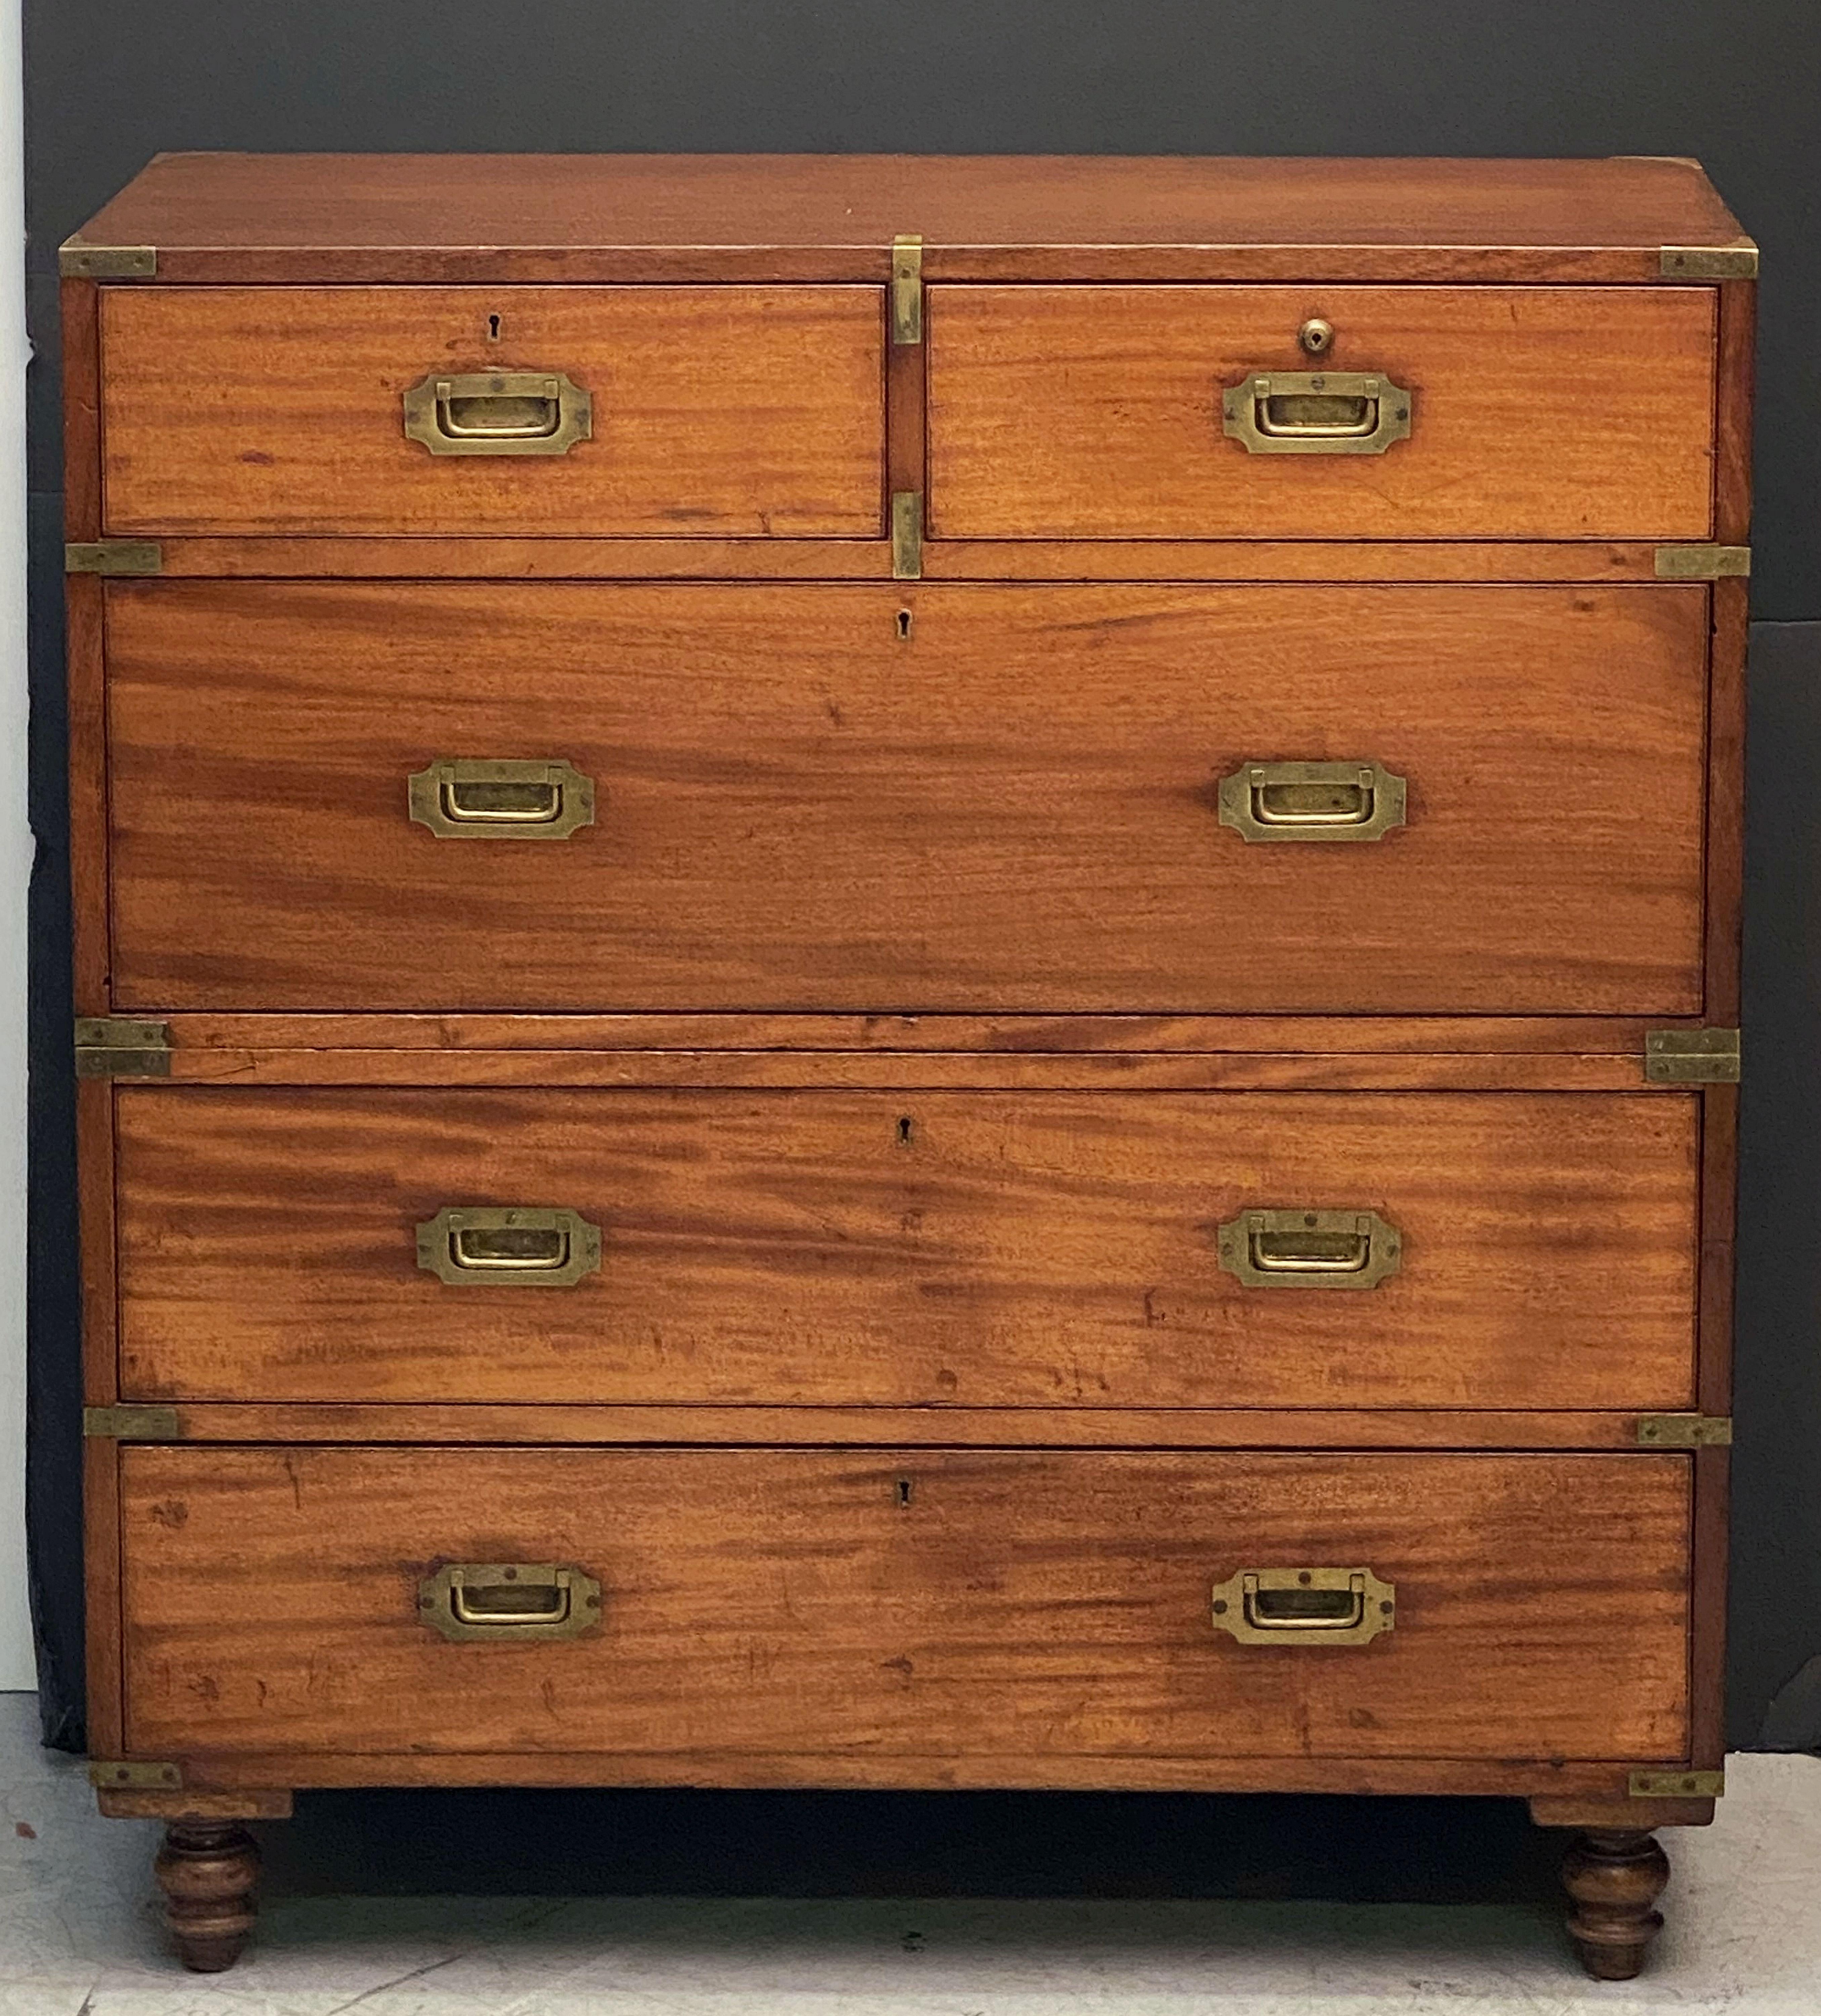 A fine English military officer’s Campaign Ware chest, featuring a handsome mahogany exterior, showing two short drawers over three long drawers.
The brass-bound chest, in two parts, accented with brass escutcheons and hardware, resting on four